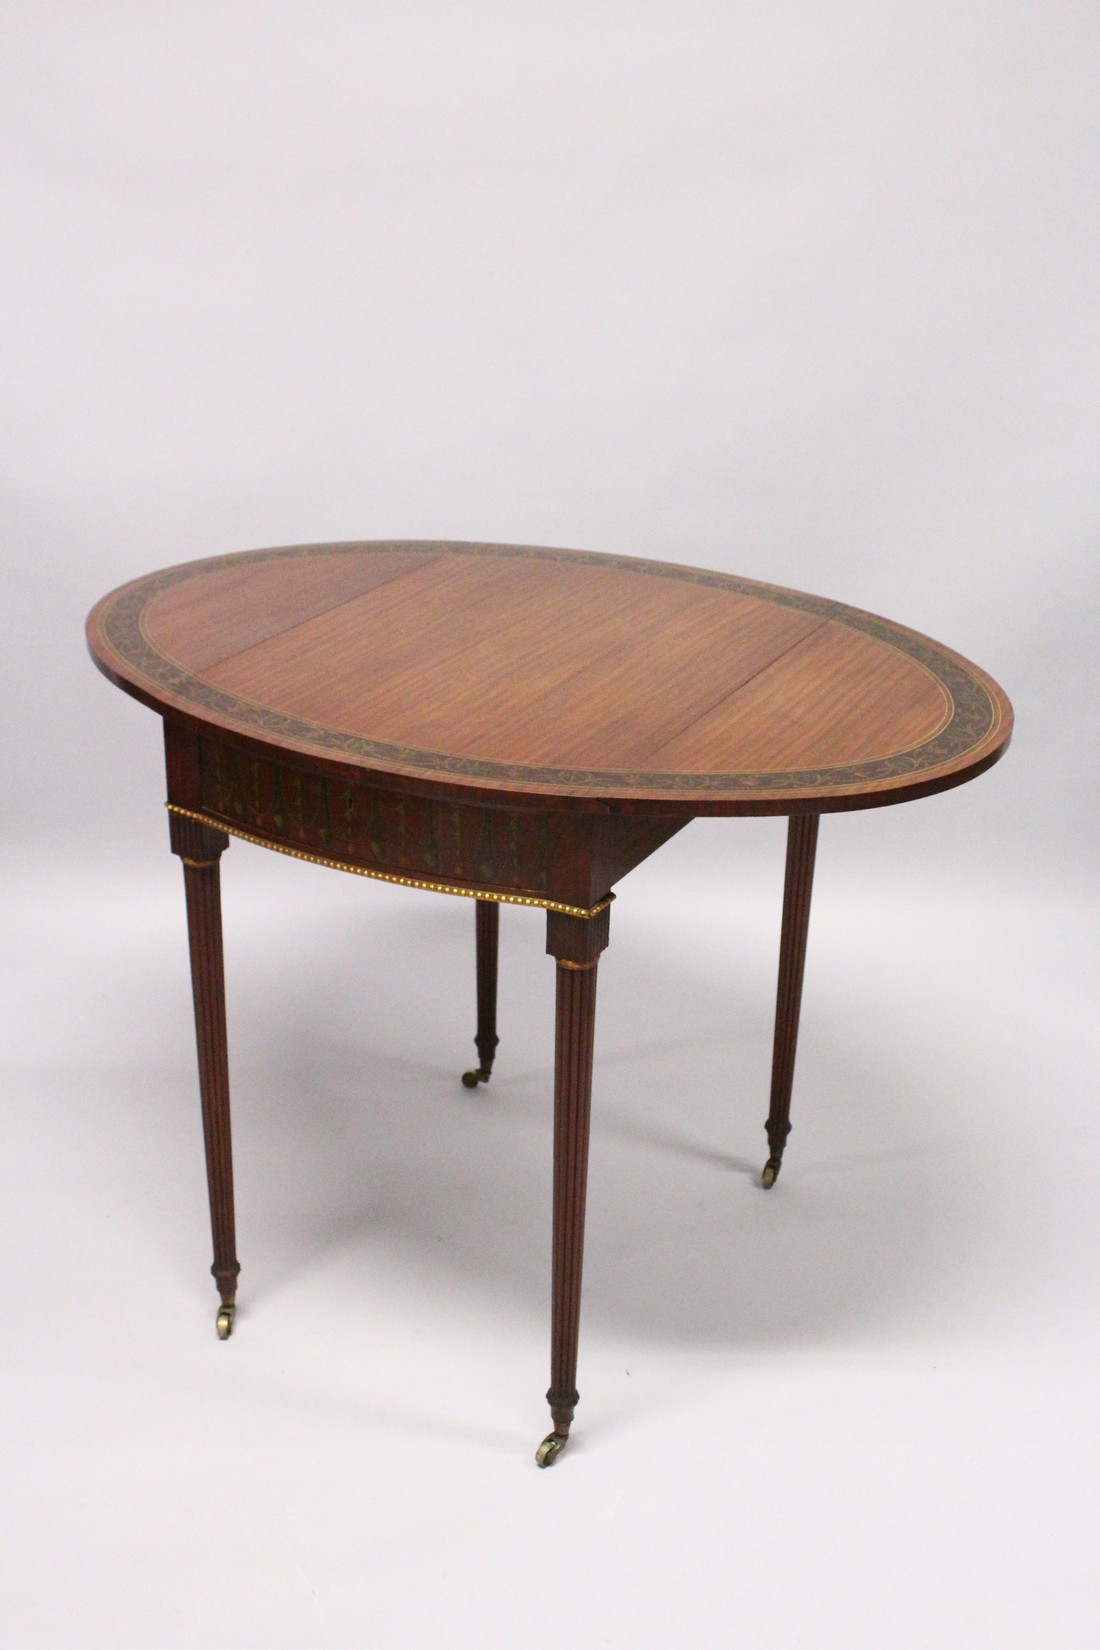 A VERY GOOD EDWARDIAN MAHOGANY AND PAINTED PEMBROOKE TABLE, PROBABLY GILLOW, the oval top painted - Image 6 of 17